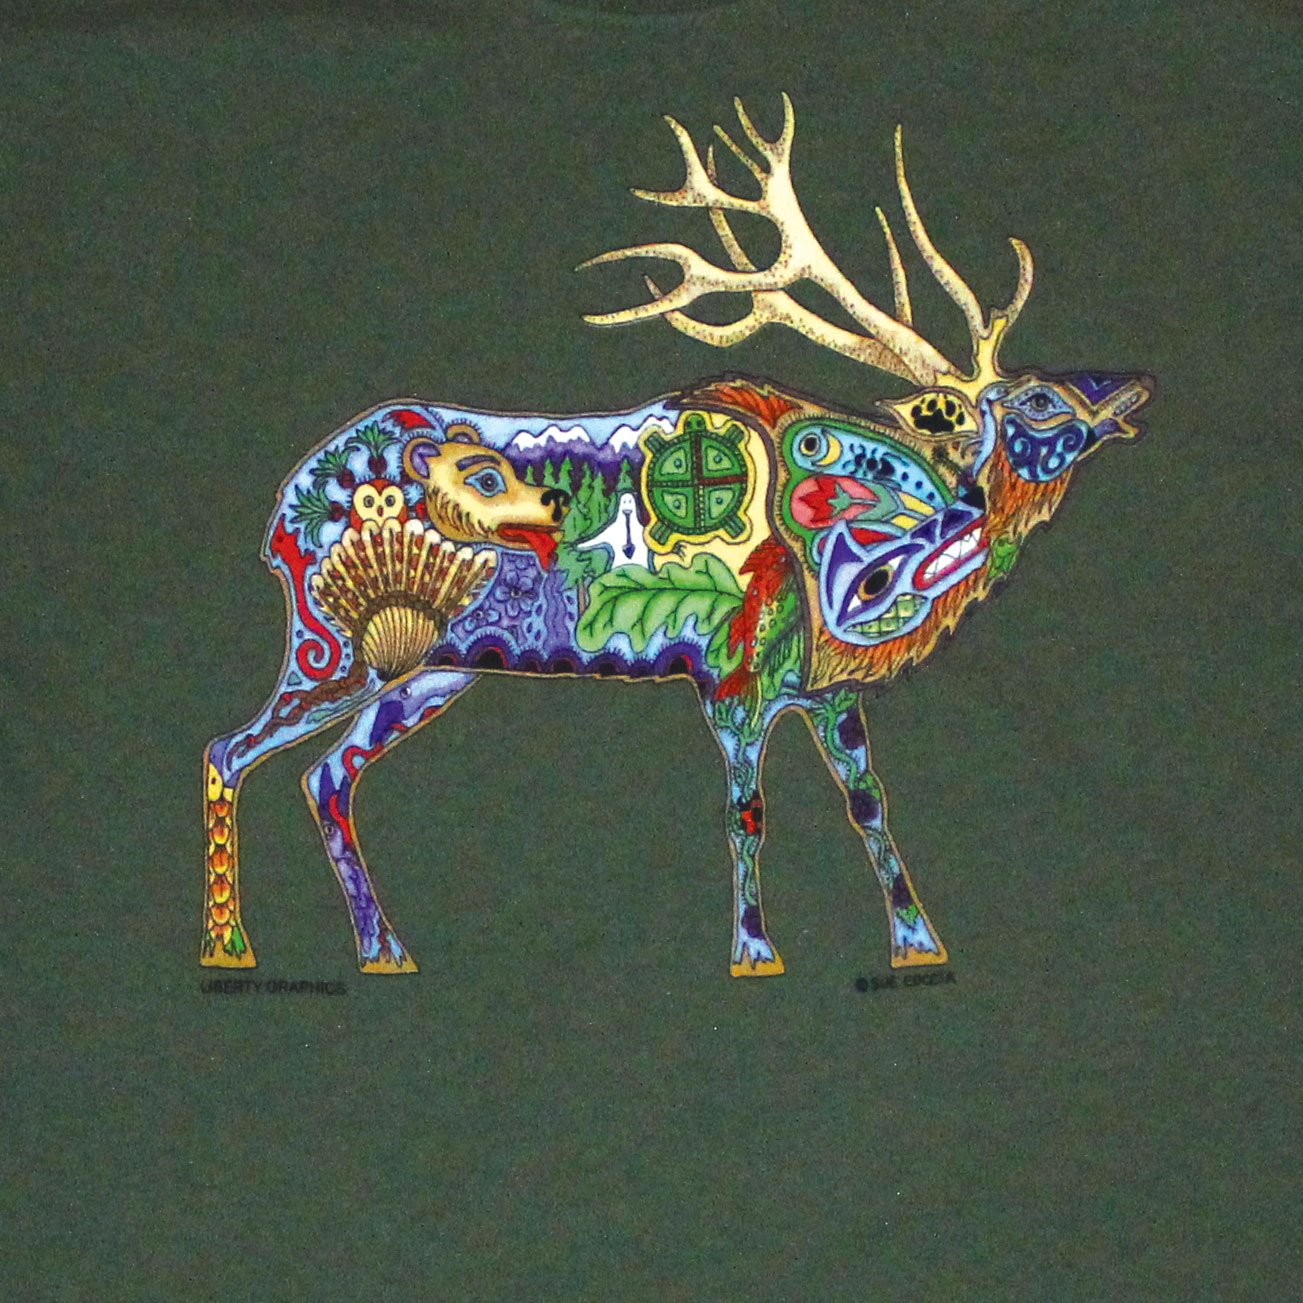 close up of the elk print tee shirt from Liberty Graphics